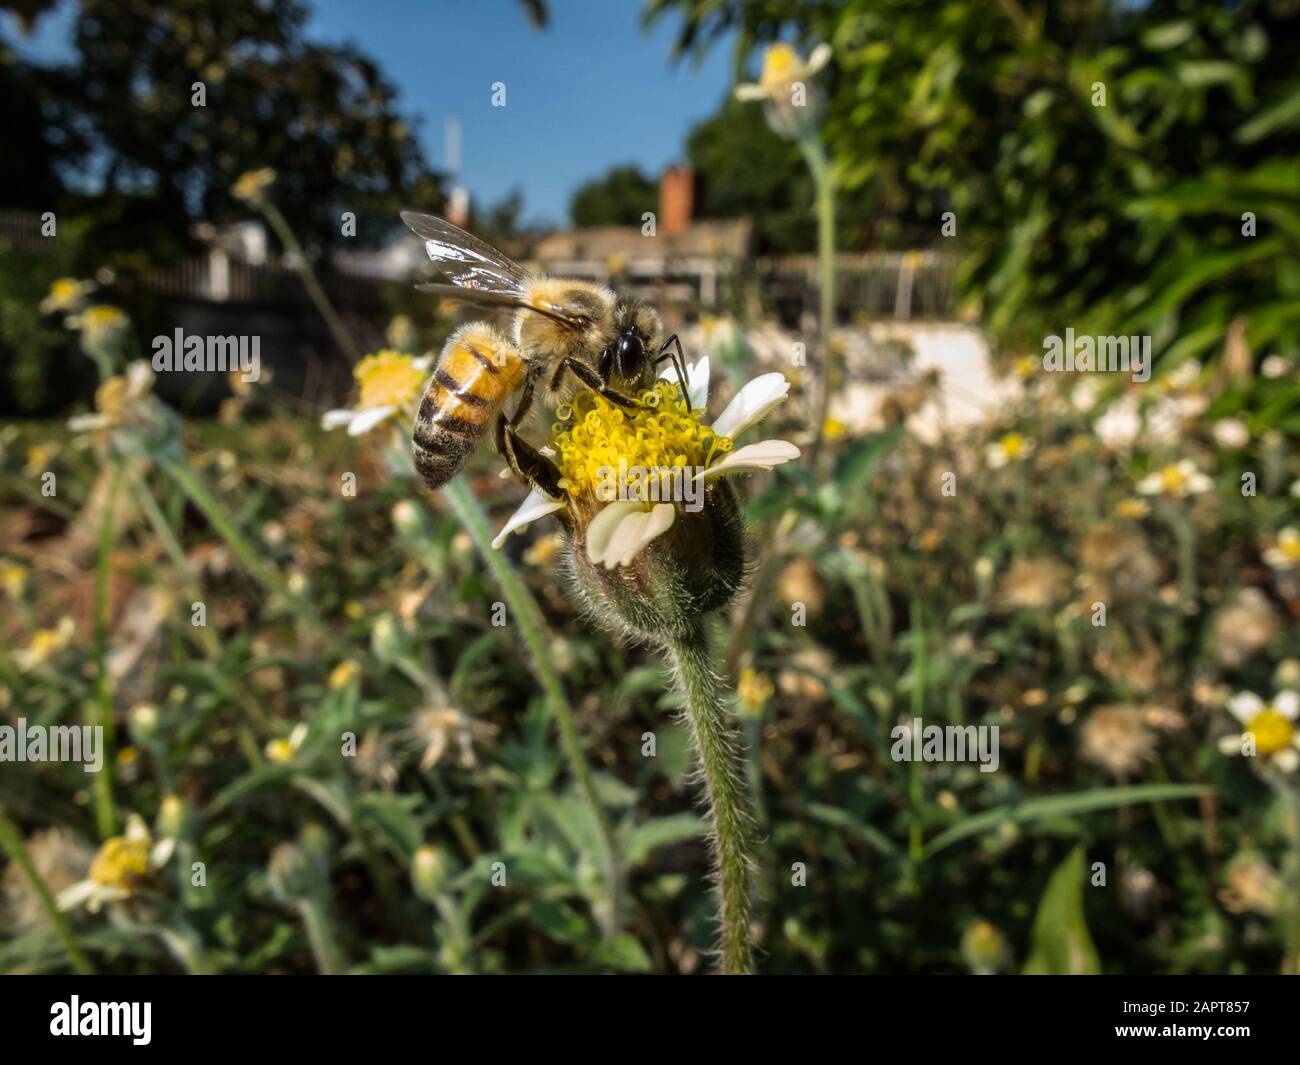 A honey bee (Apis mellifera) forages on a tridax daisy (Tridax procumbens), aka coatbuttons, wildflower in the backyard, Asuncion, Paraguay Stock Photo